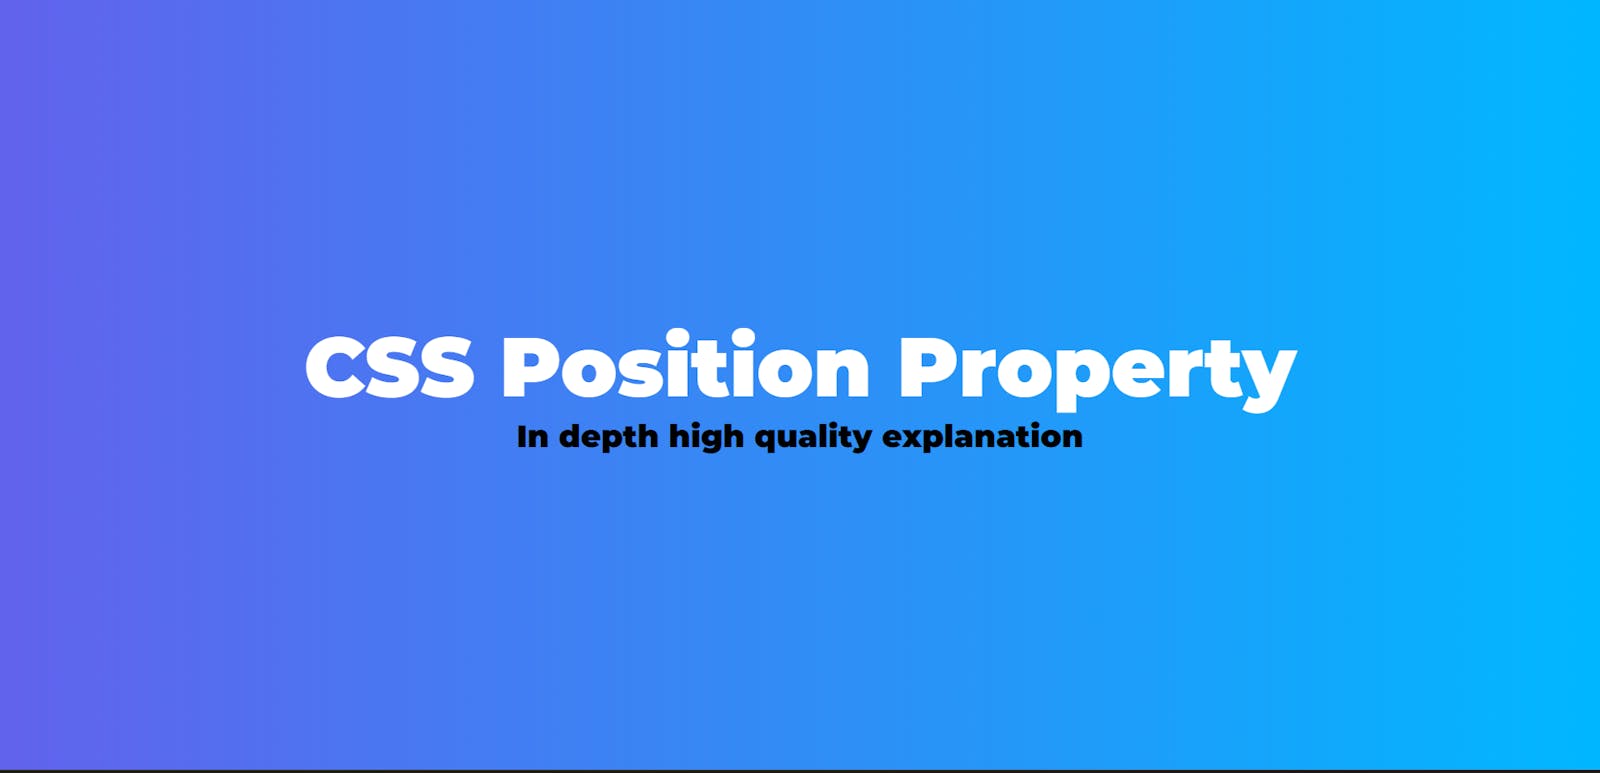 CSS position property in depth high quality explanation